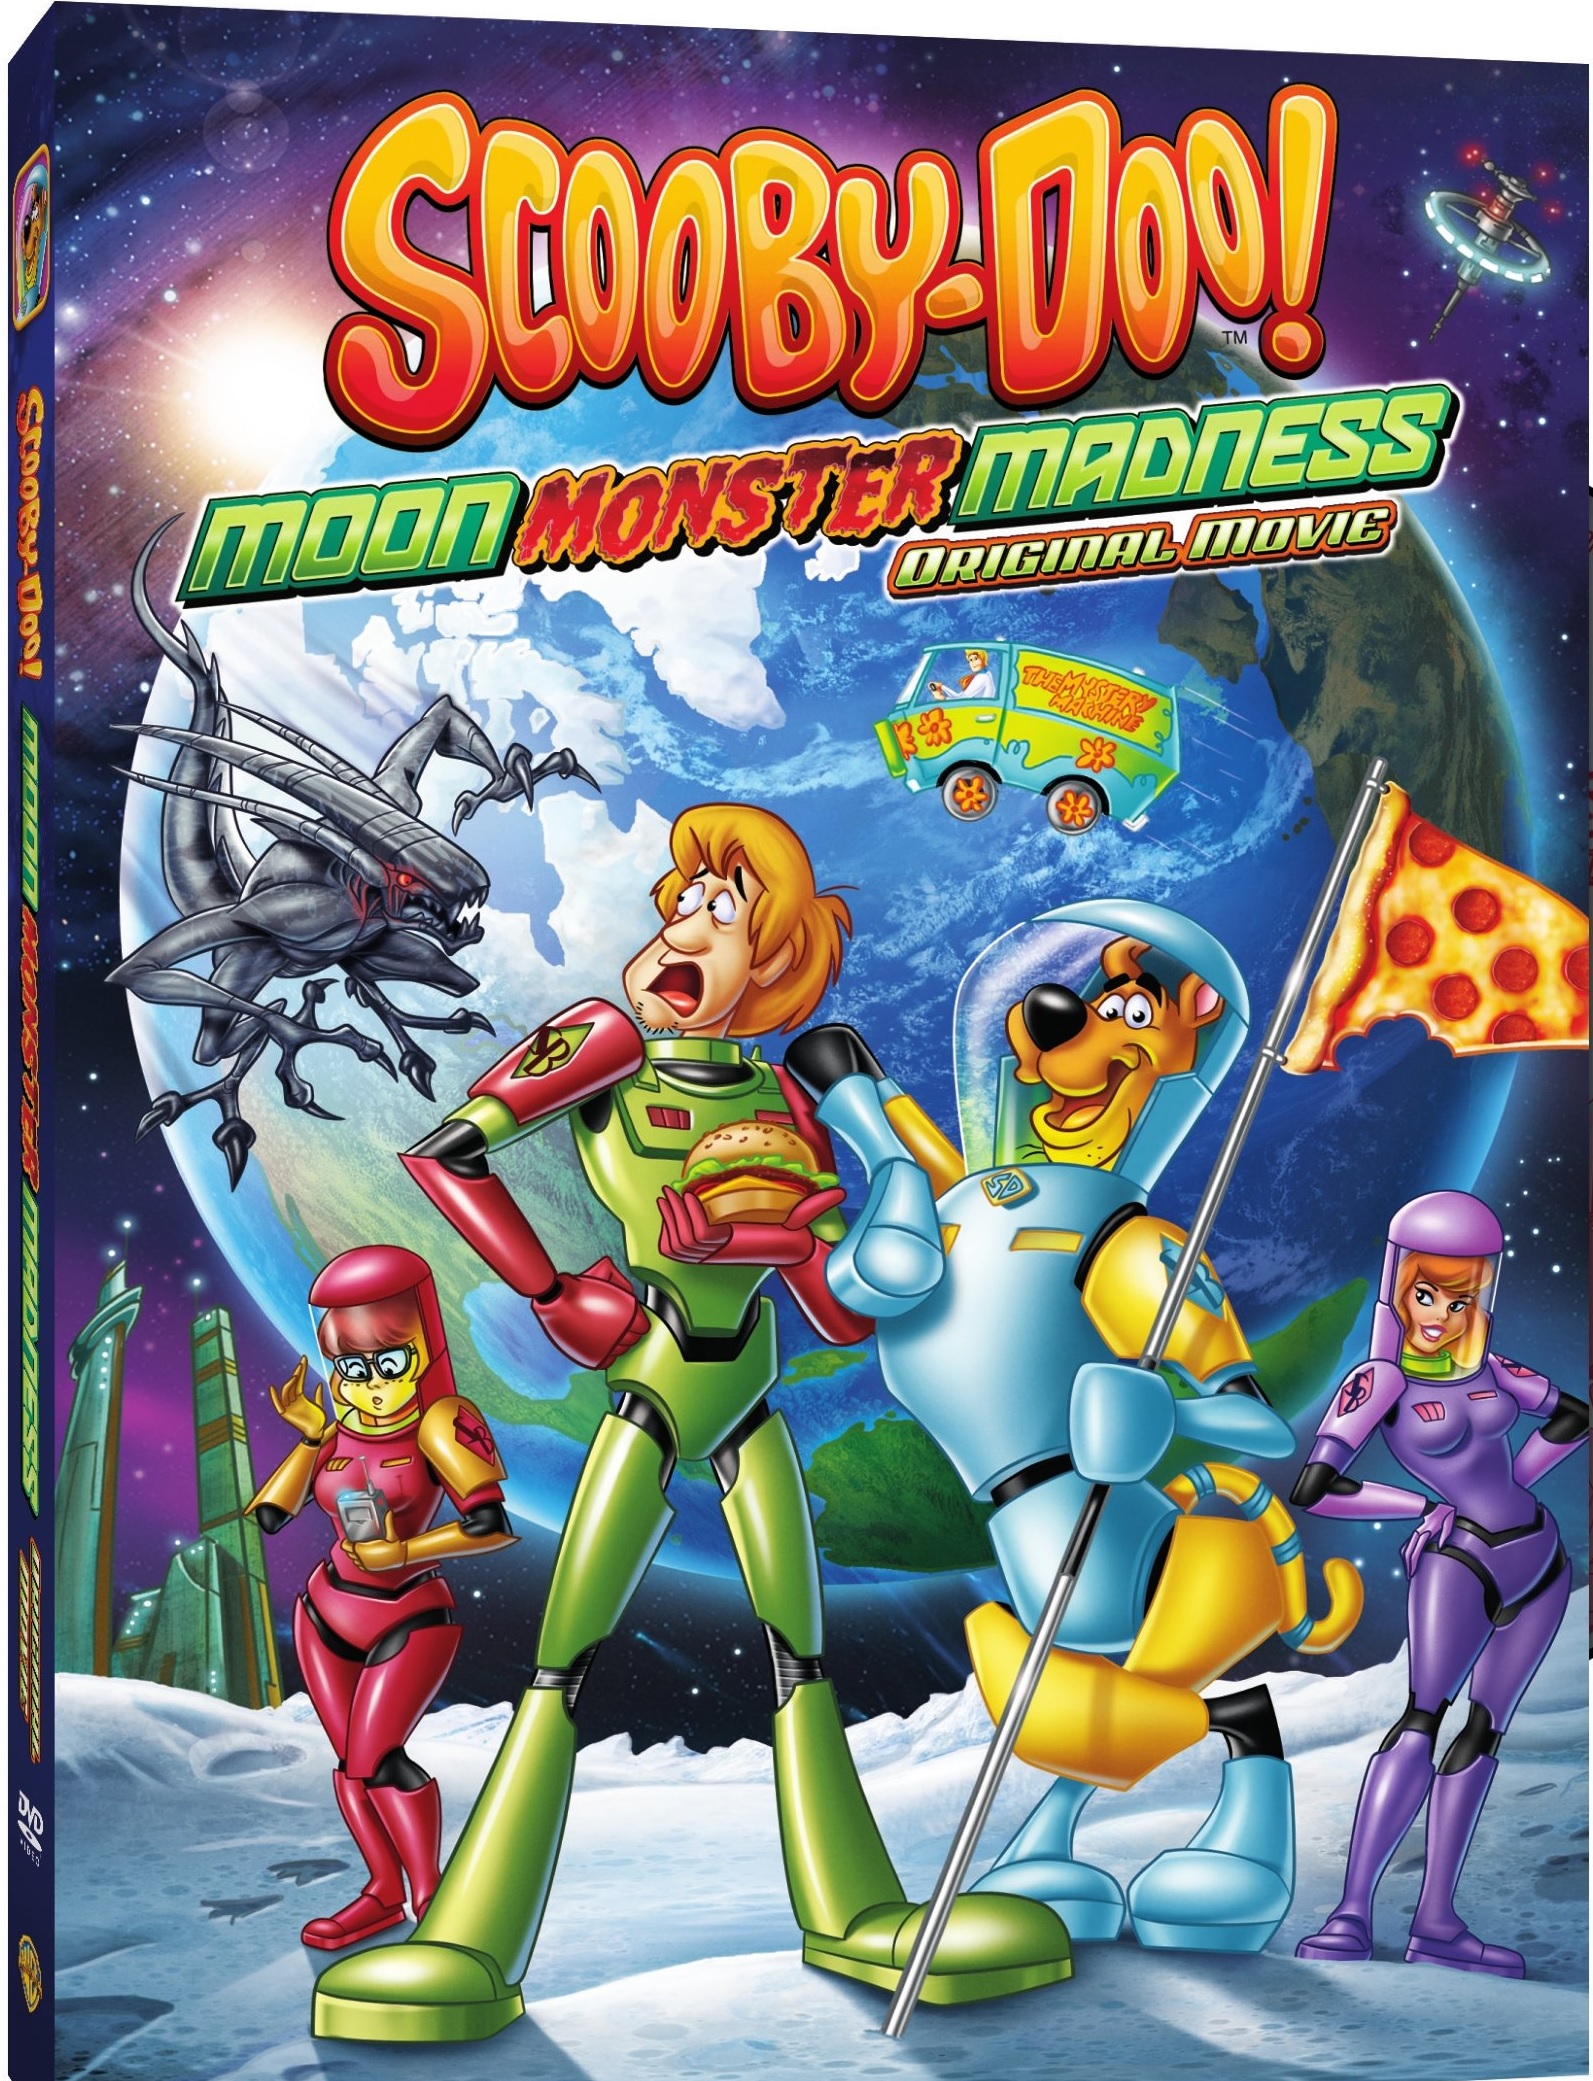 Scooby Doo Moon Monster Madness DVD Review